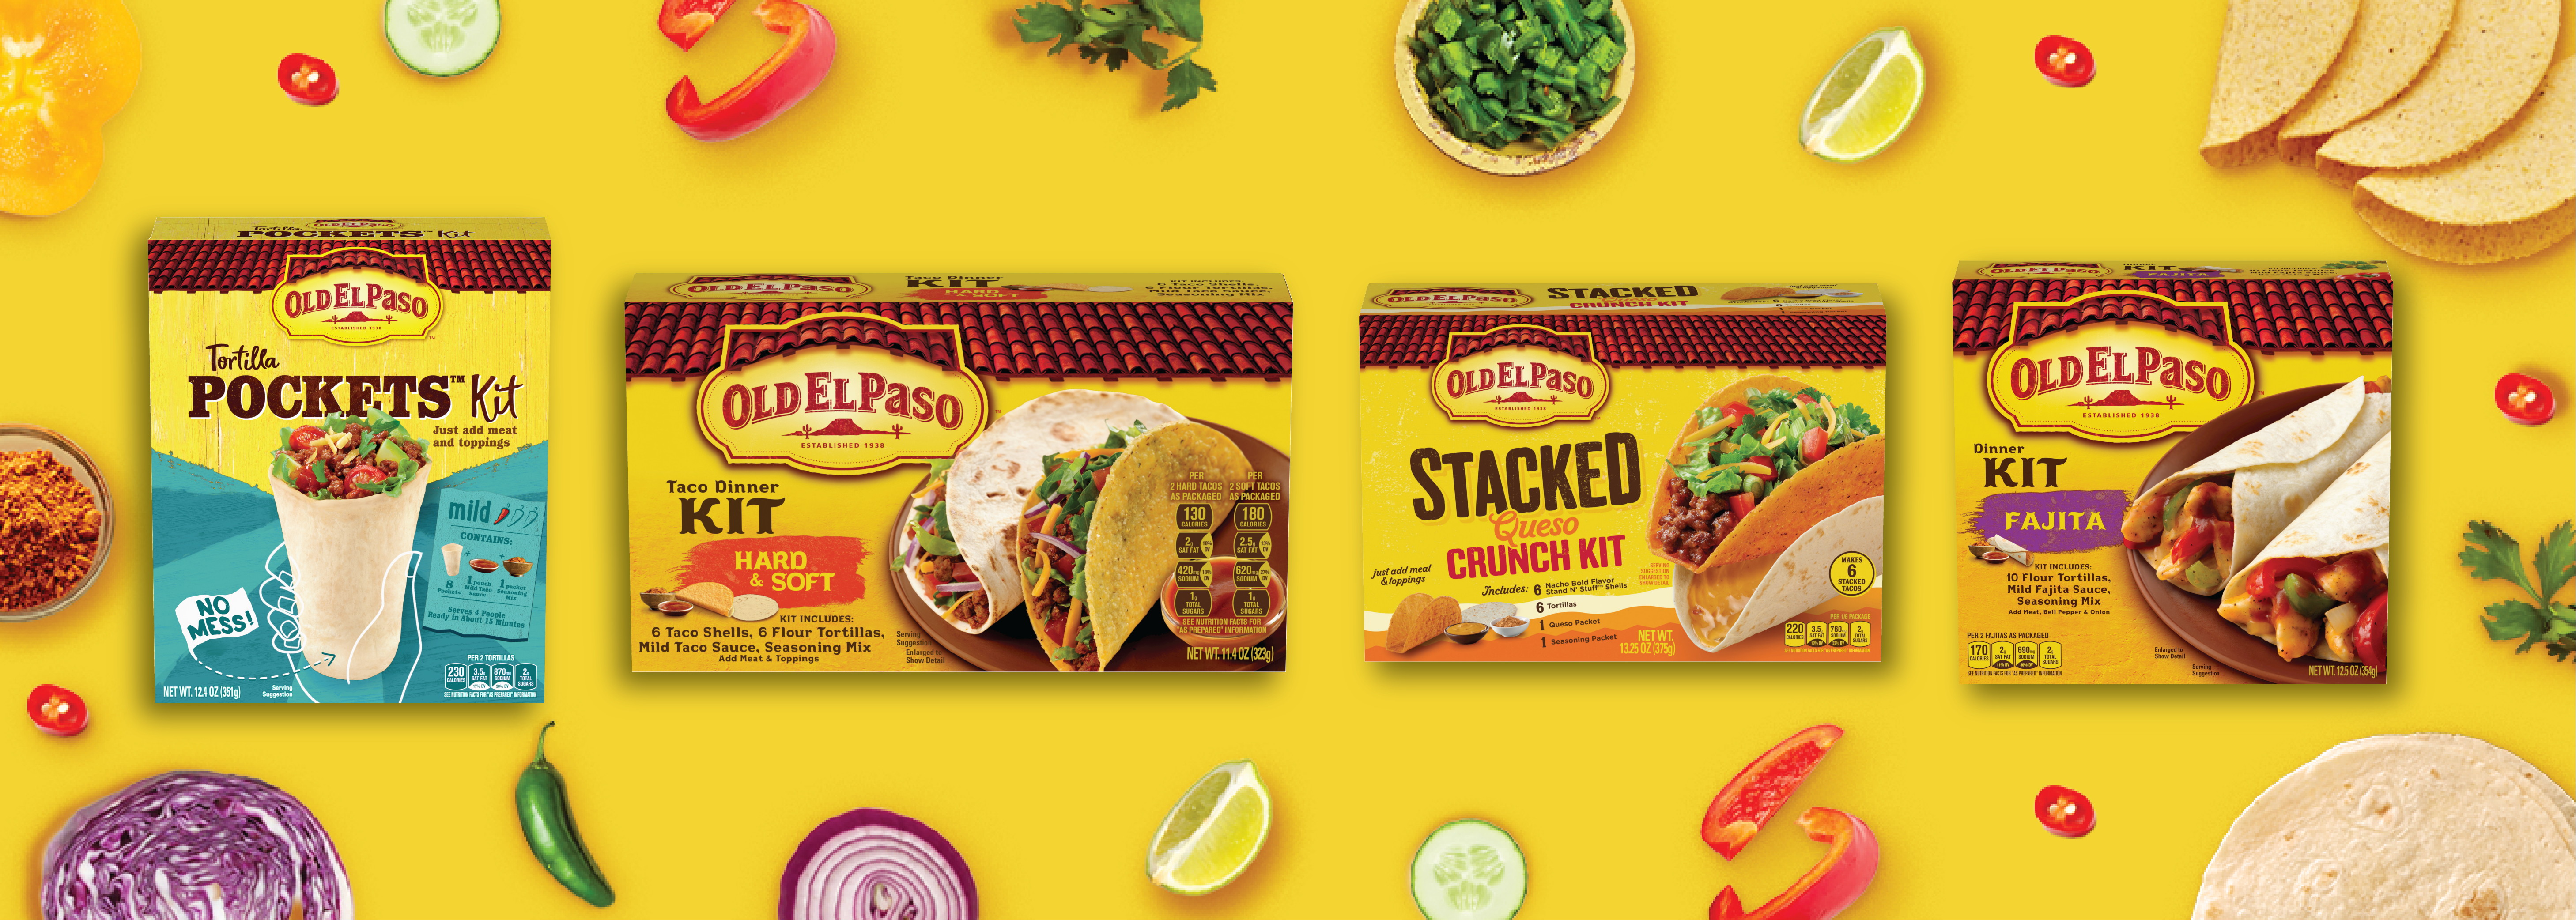 Old El Paso assorted products in Tortilla pocket Kit, front of box; Taco dinner kit, front of box; Stacked Queso crunch kit, front of box; and Fajita Dinner kit, front of box, on a yellow background surrounded by taco ingredients 